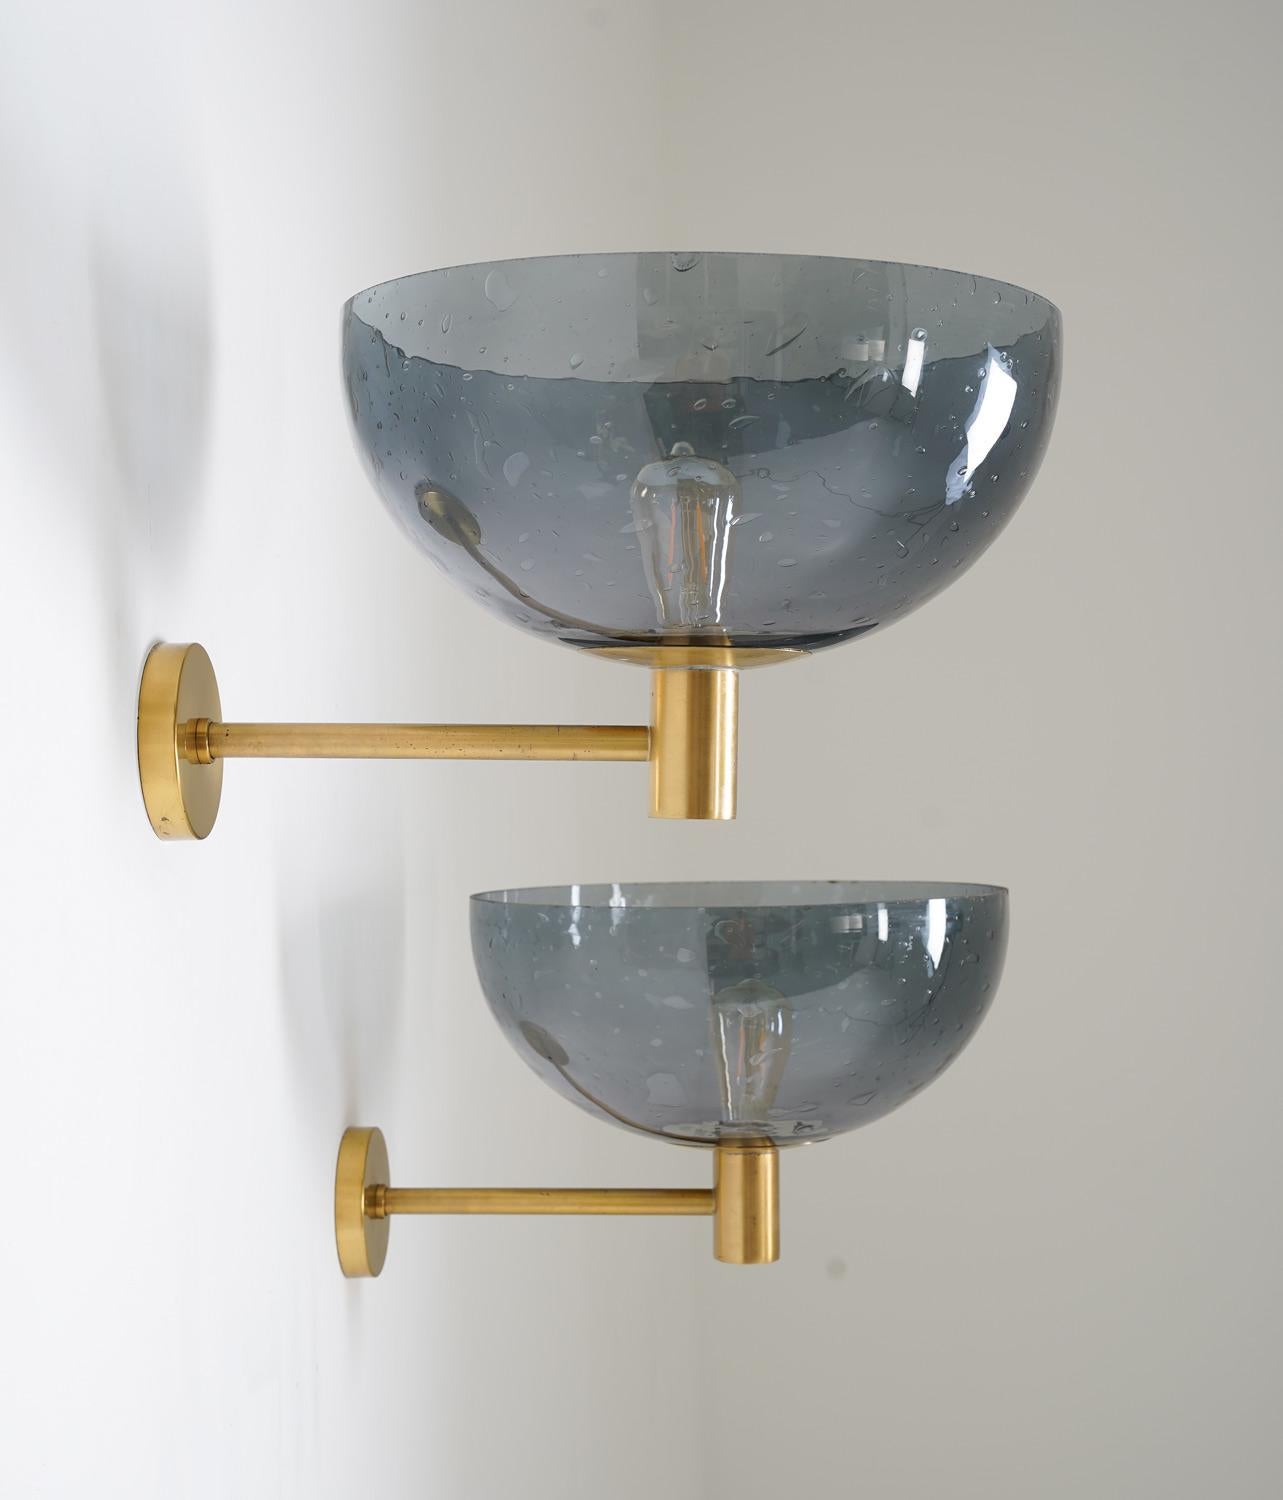 These wall lights are a beautiful example of mid-century Scandinavian design. Manufactured in Sweden in the 1960s, each lamp features a single light source surrounded by a large blue glass shade. The shade is attached to a brass holder, adding to